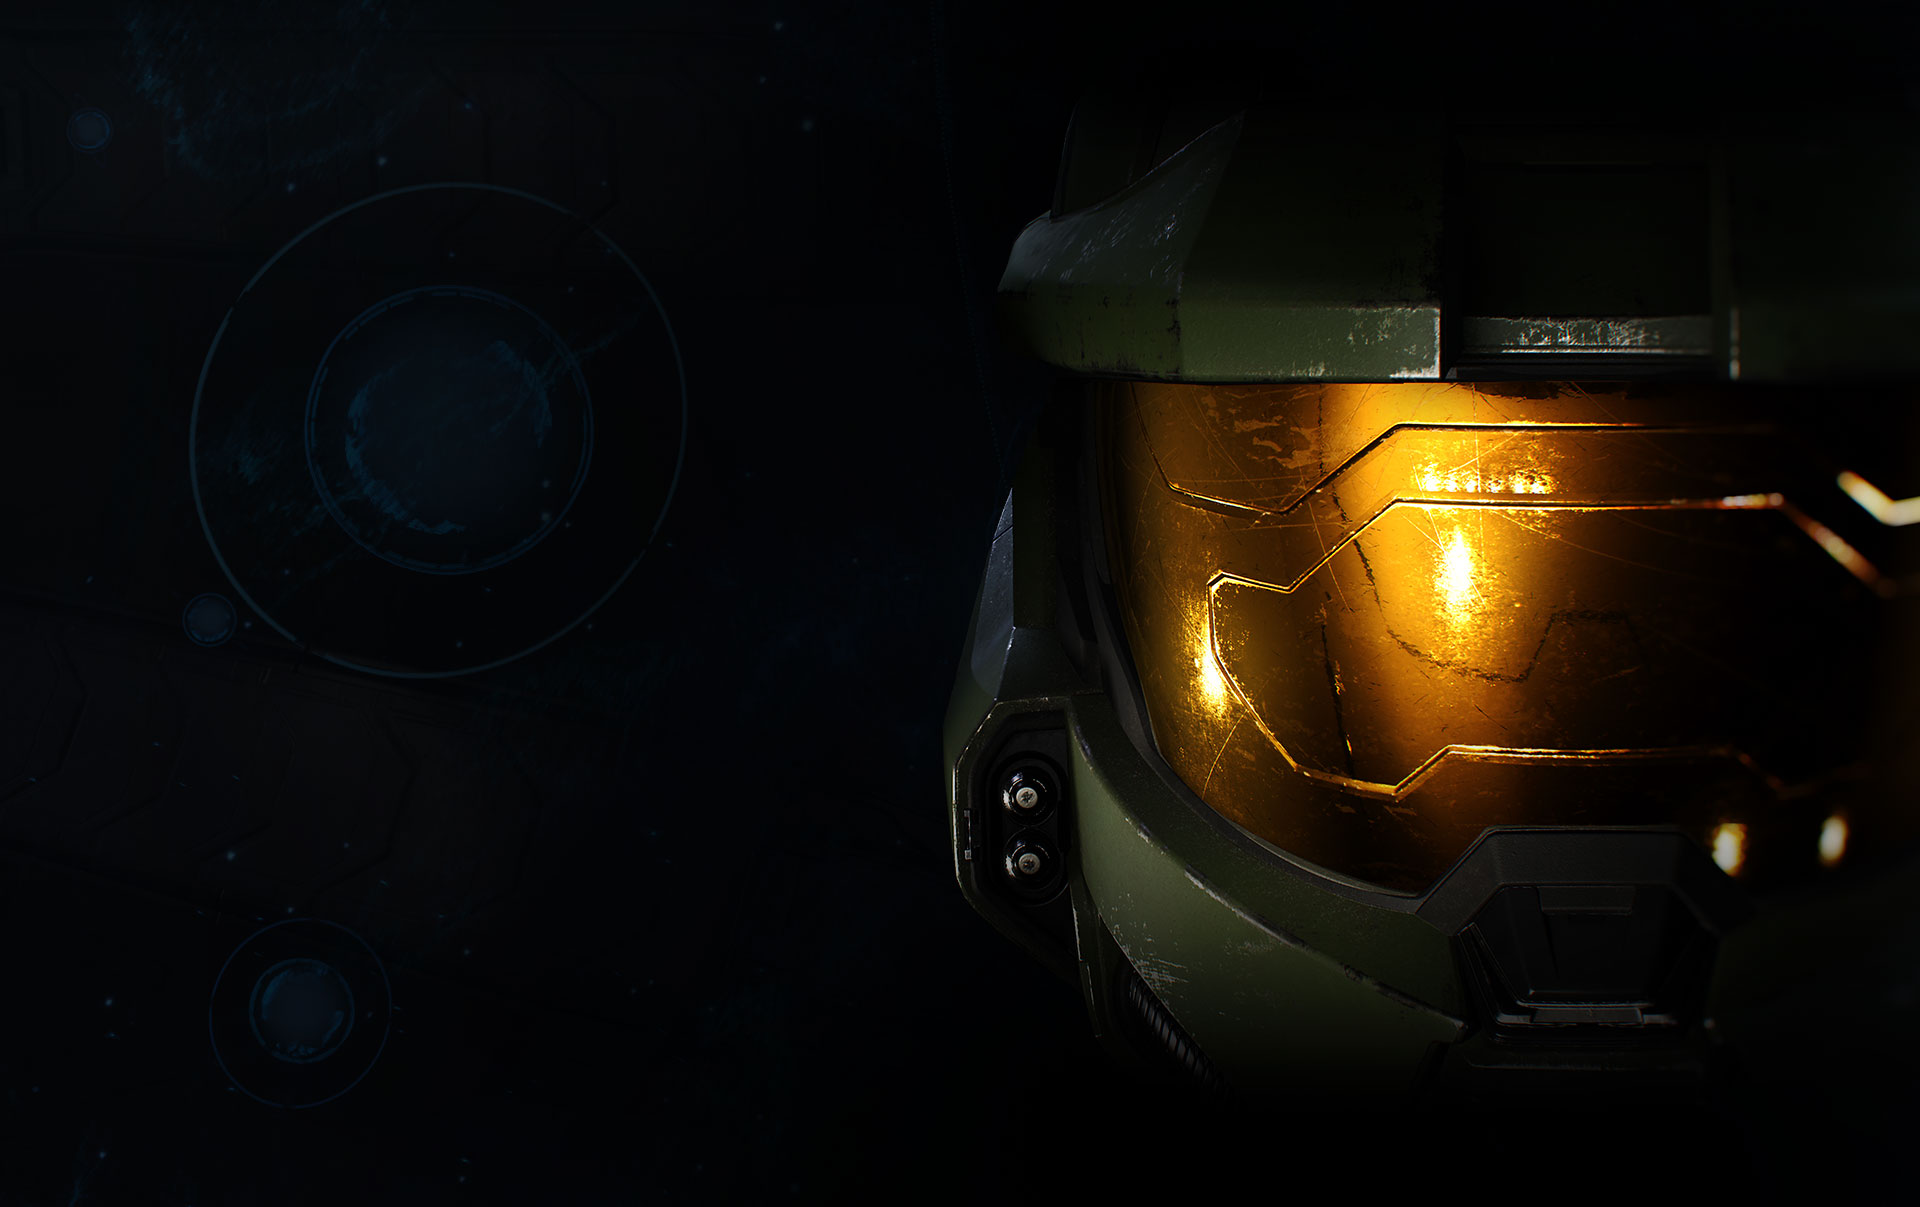 Halo Banners Wallpapers